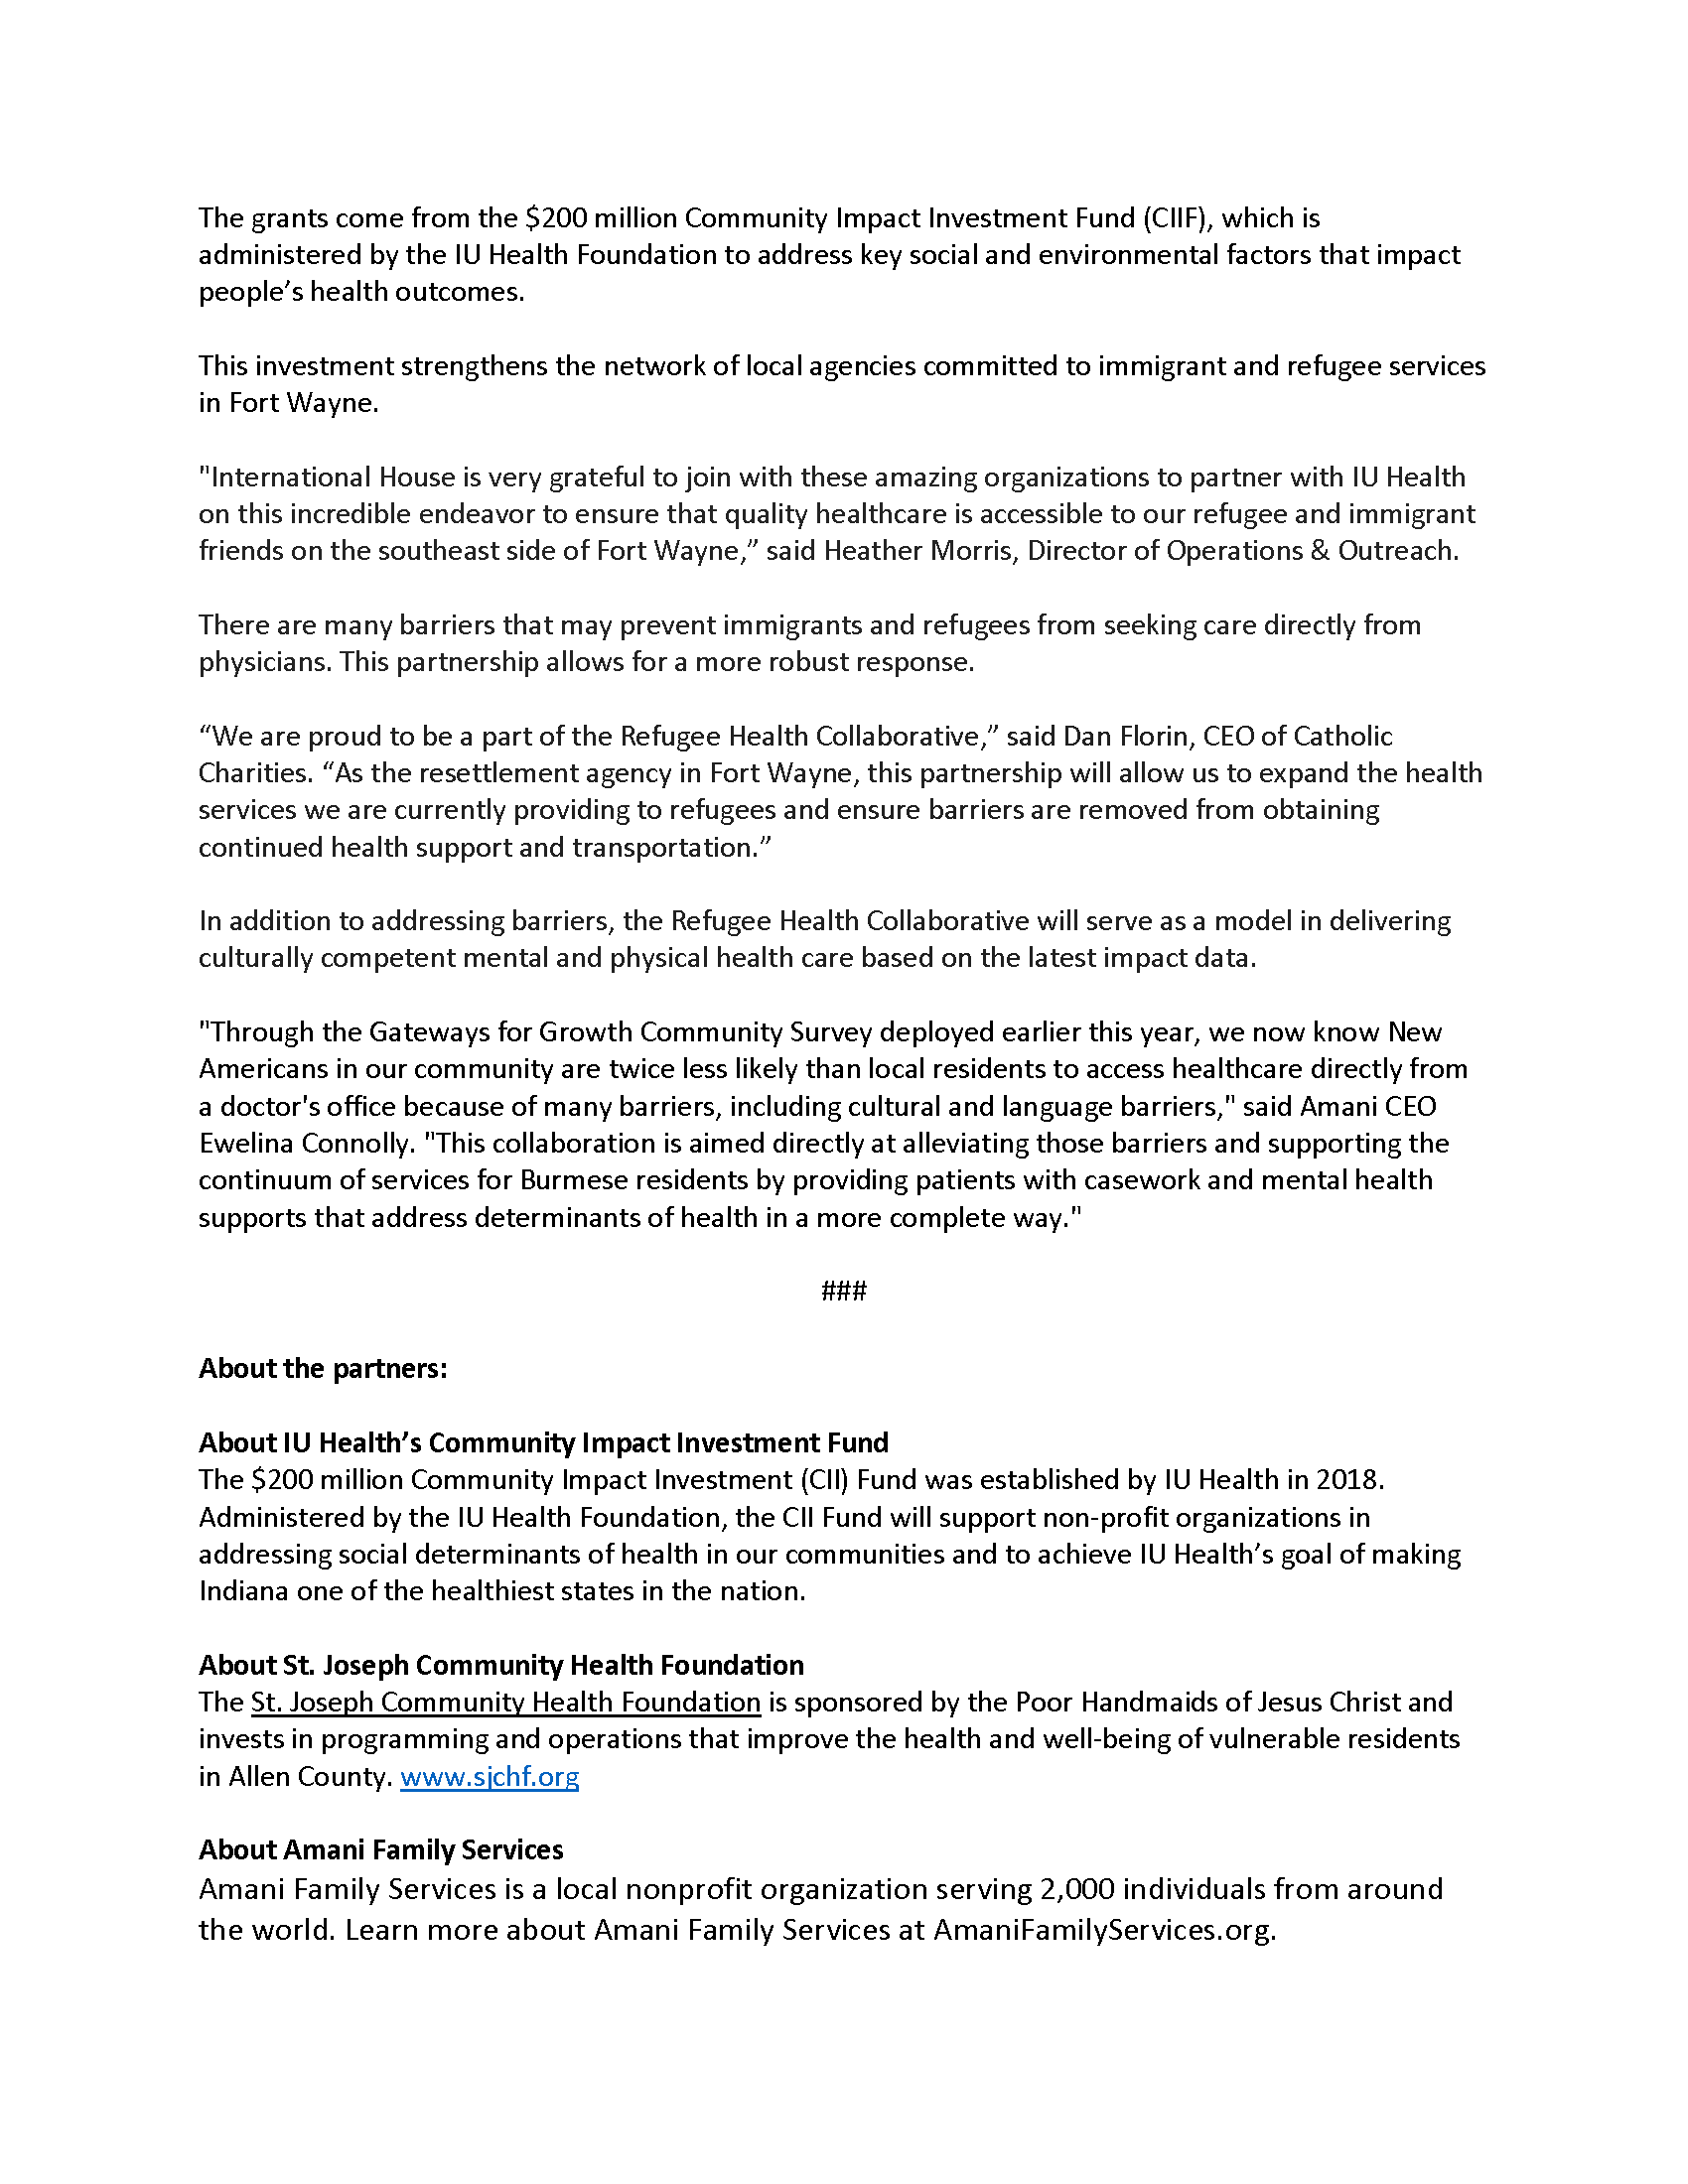 Press Release_IU Health Grant_Page_2.png